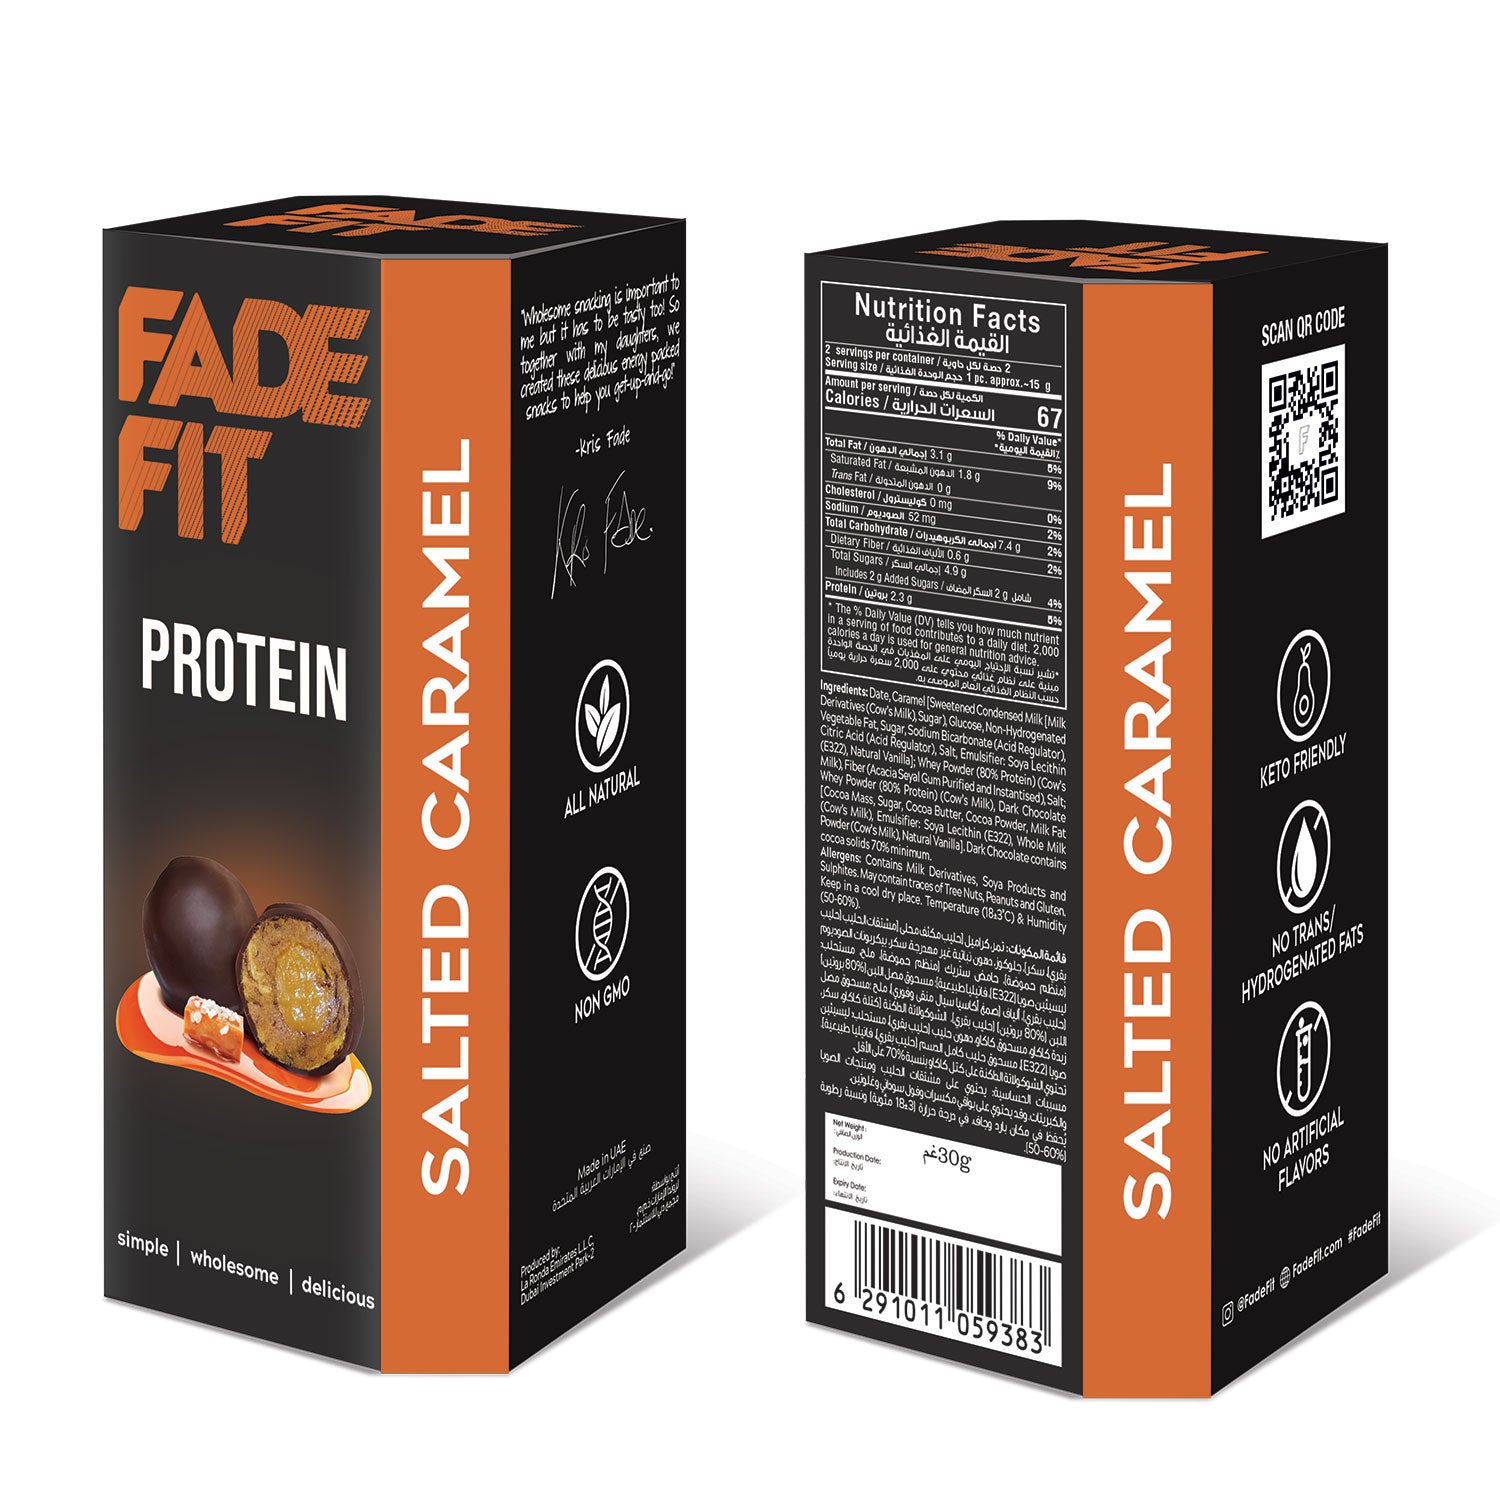 FADE FIT Salted Caramel Protein, 30g - Keto Friendly, Non GMO, Natural